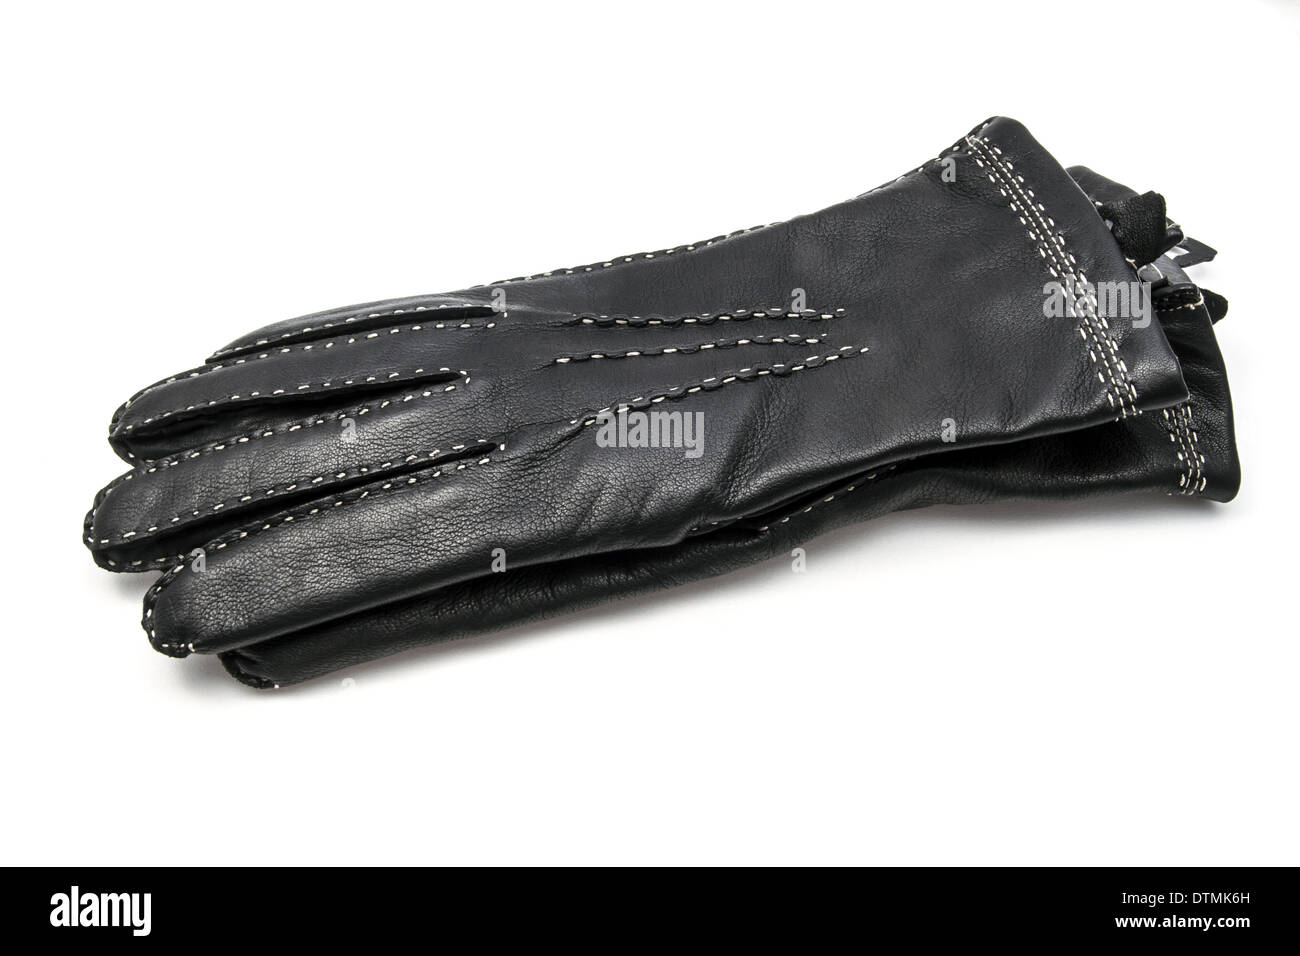 Black Leather Gloves High Resolution Stock Photography and Images - Alamy